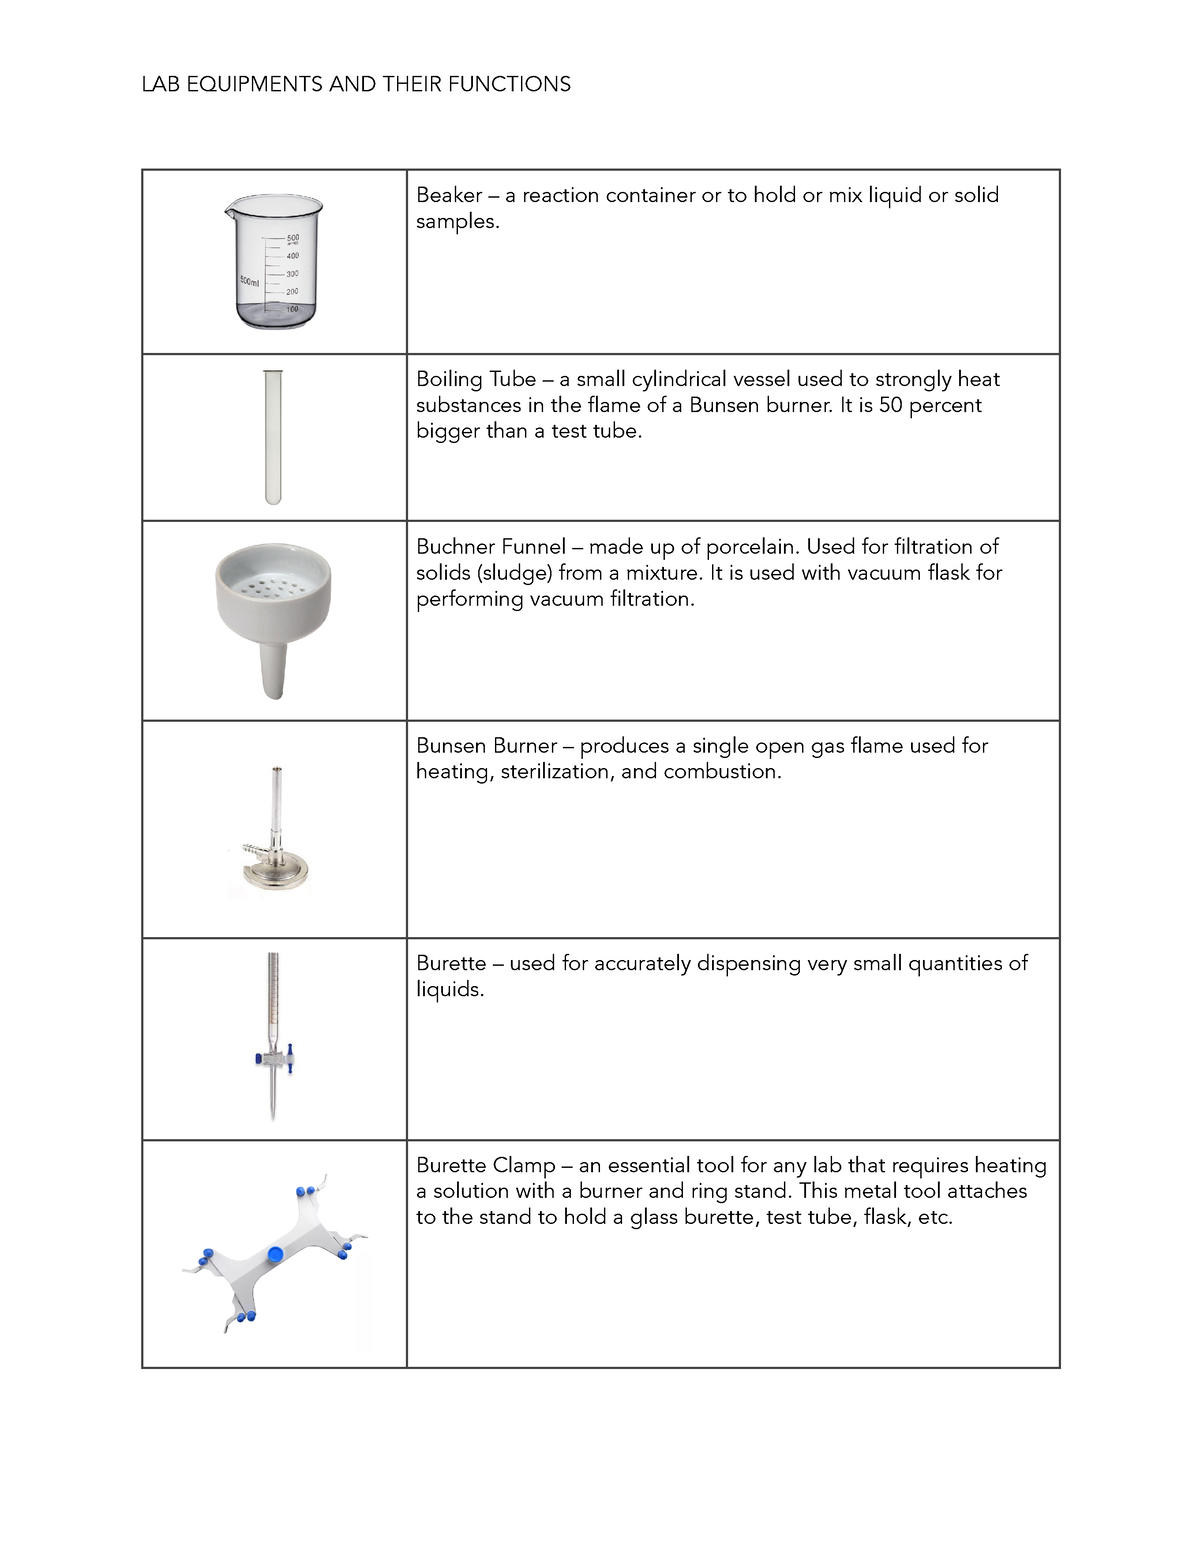 Lab Equipments and Their Functions - LAB EQUIPMENTS AND THEIR FUNCTIONS ...